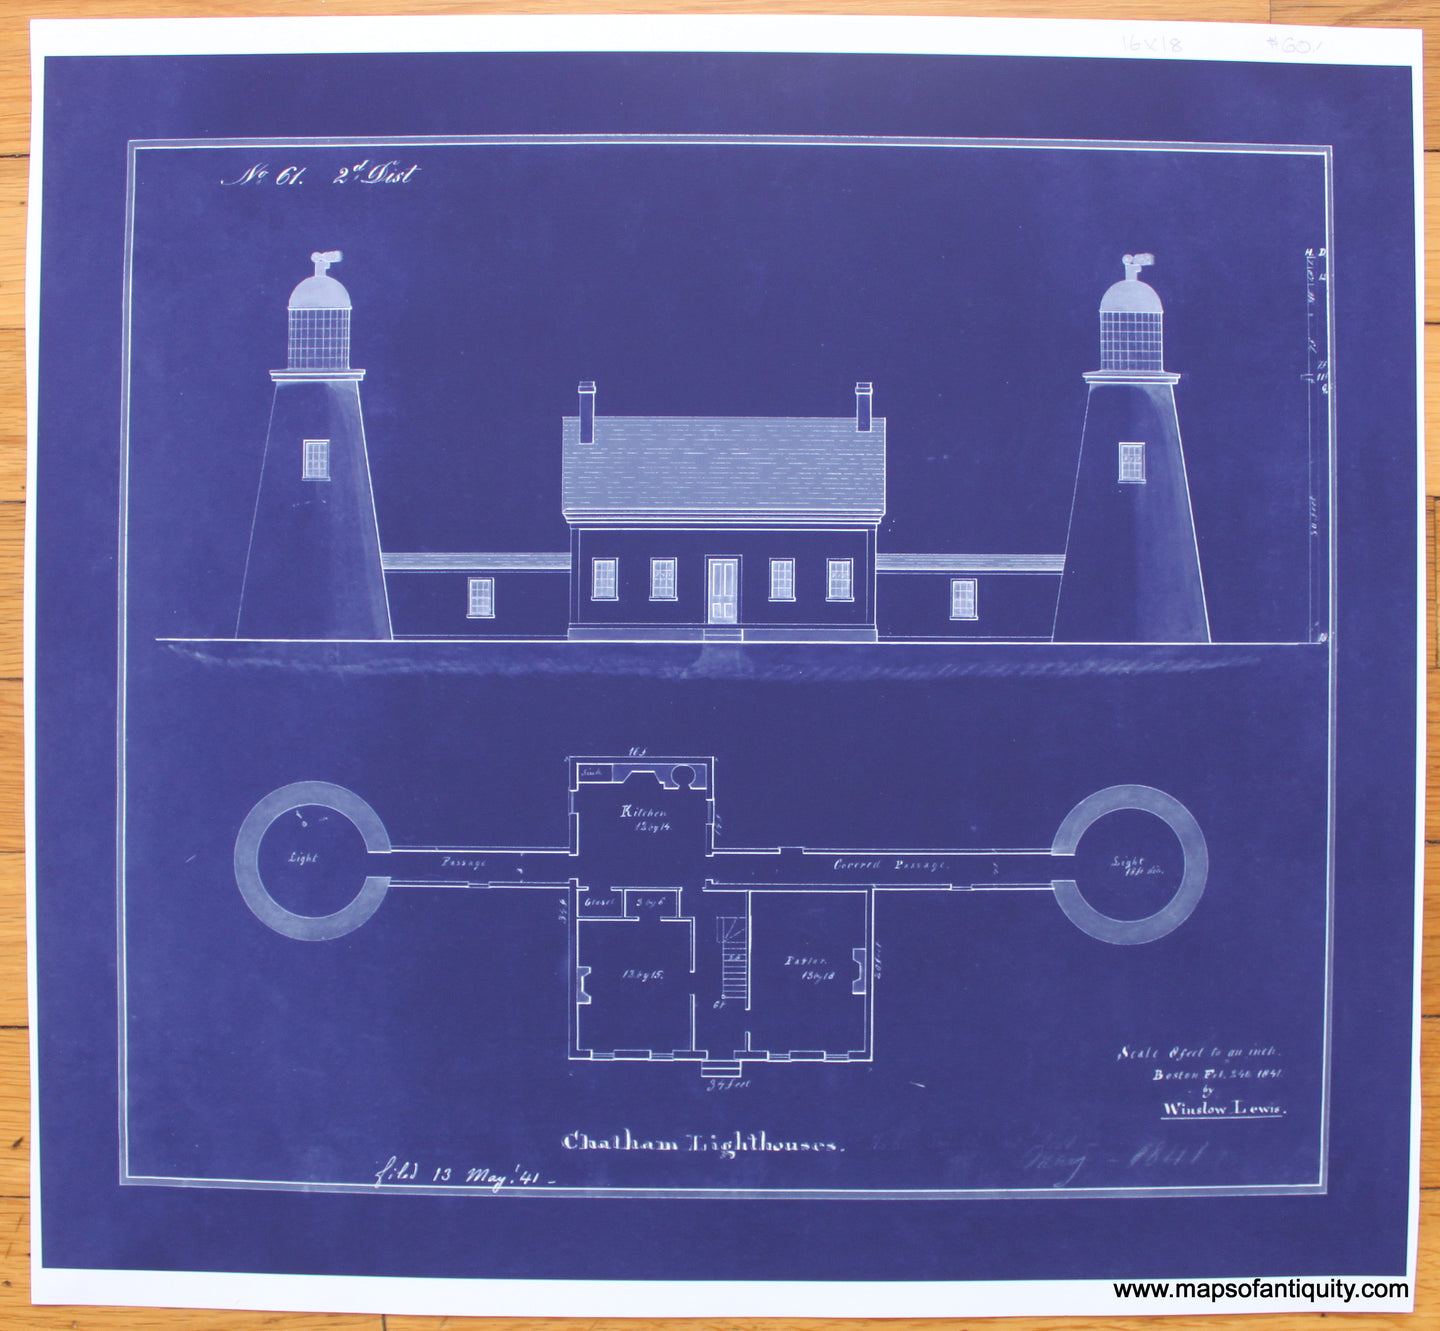 Reproduction-Chatham-Lighthouses-blueprint-reproduction-1800s-19th-century-Maps-of-Antiquity